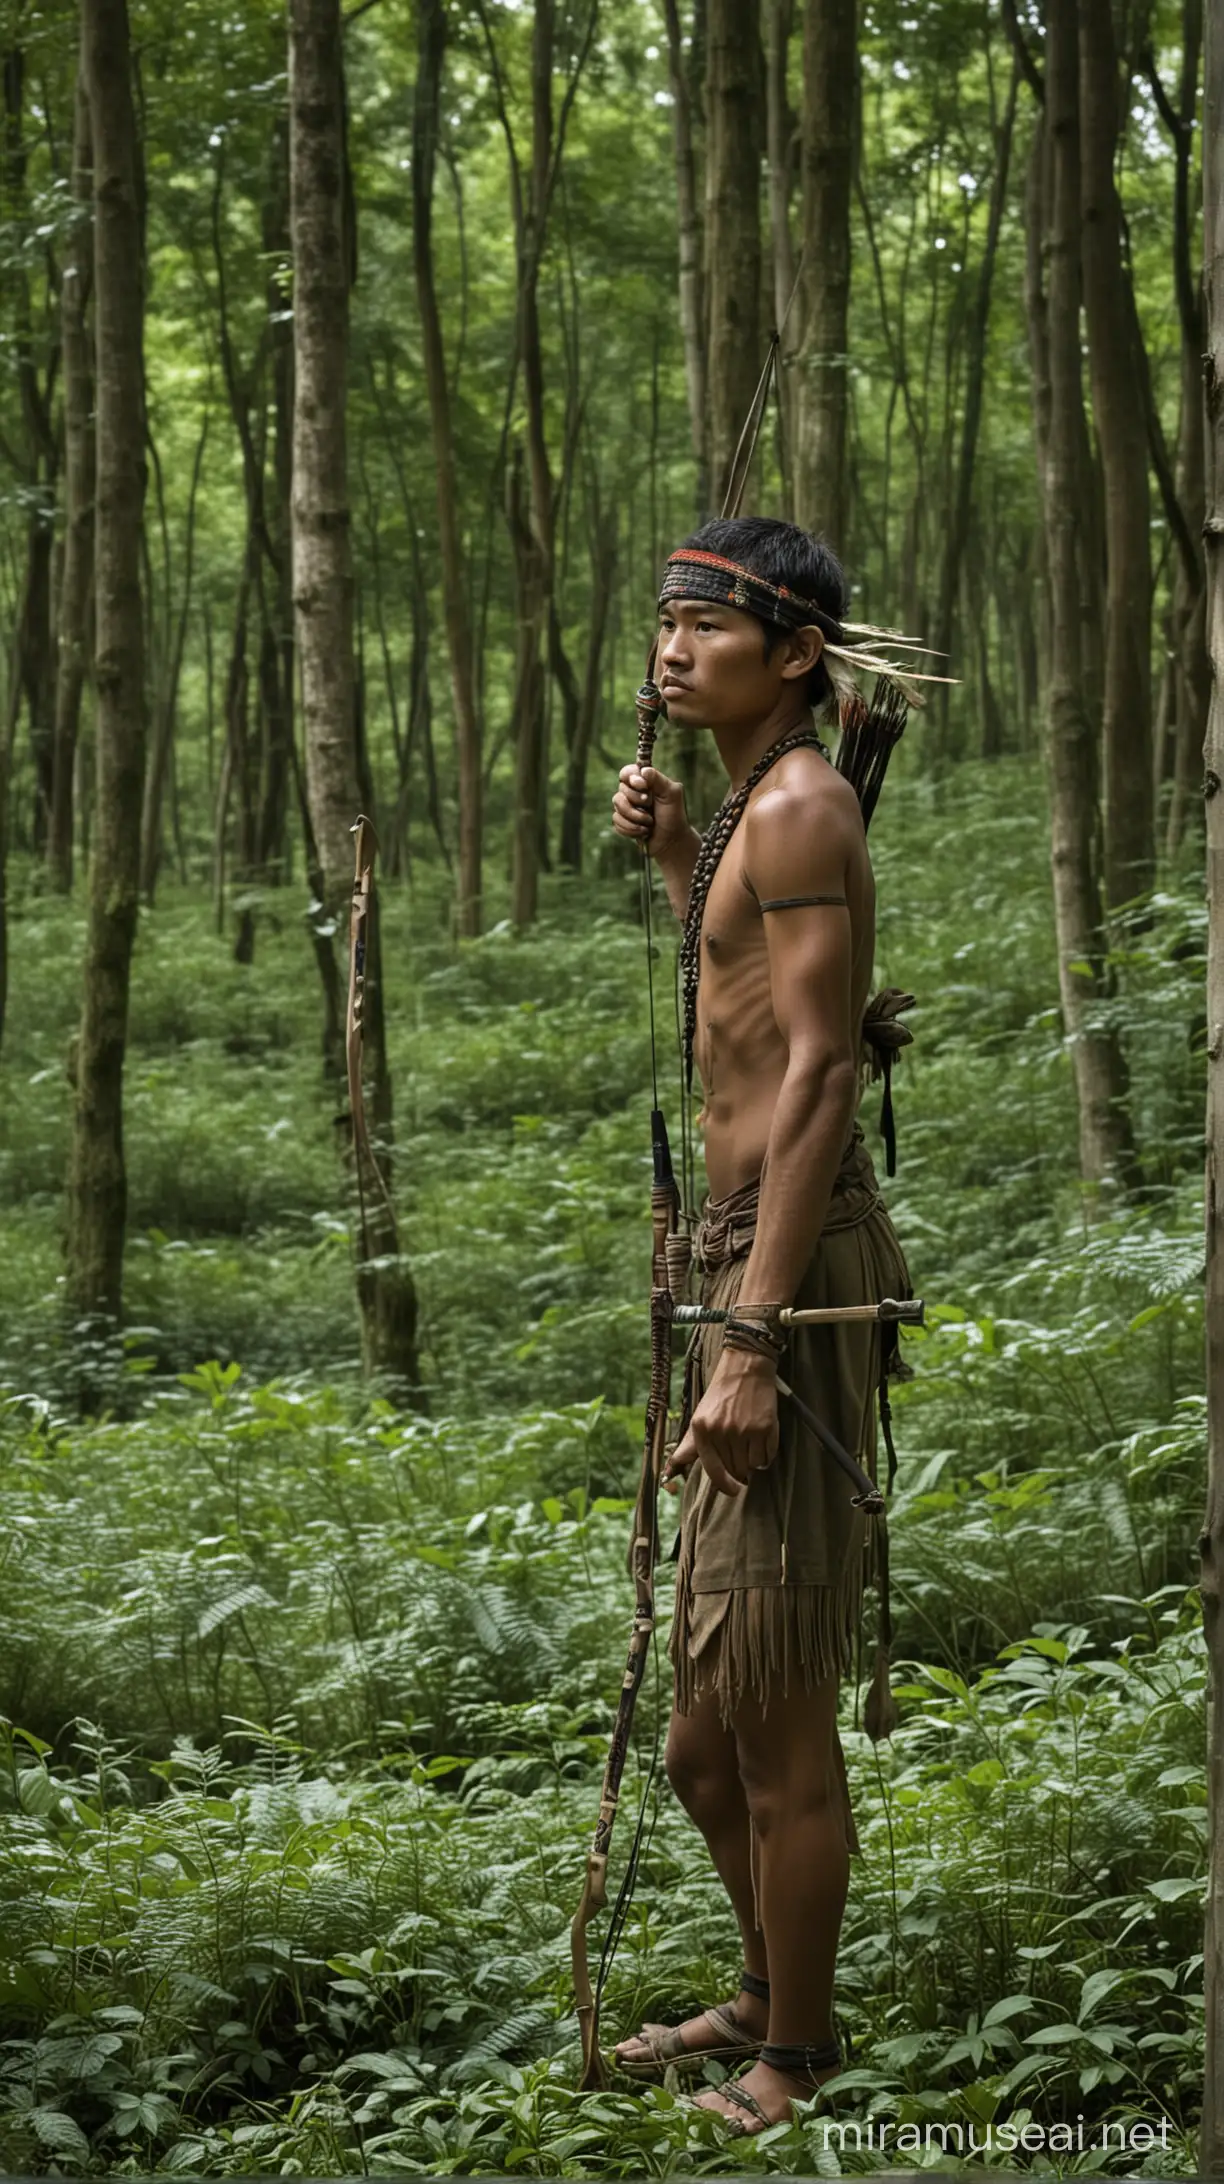 A member of the Awa tribe hidden in the depths of the lush green forest is seen preparing to hunt, preparing his bow.
